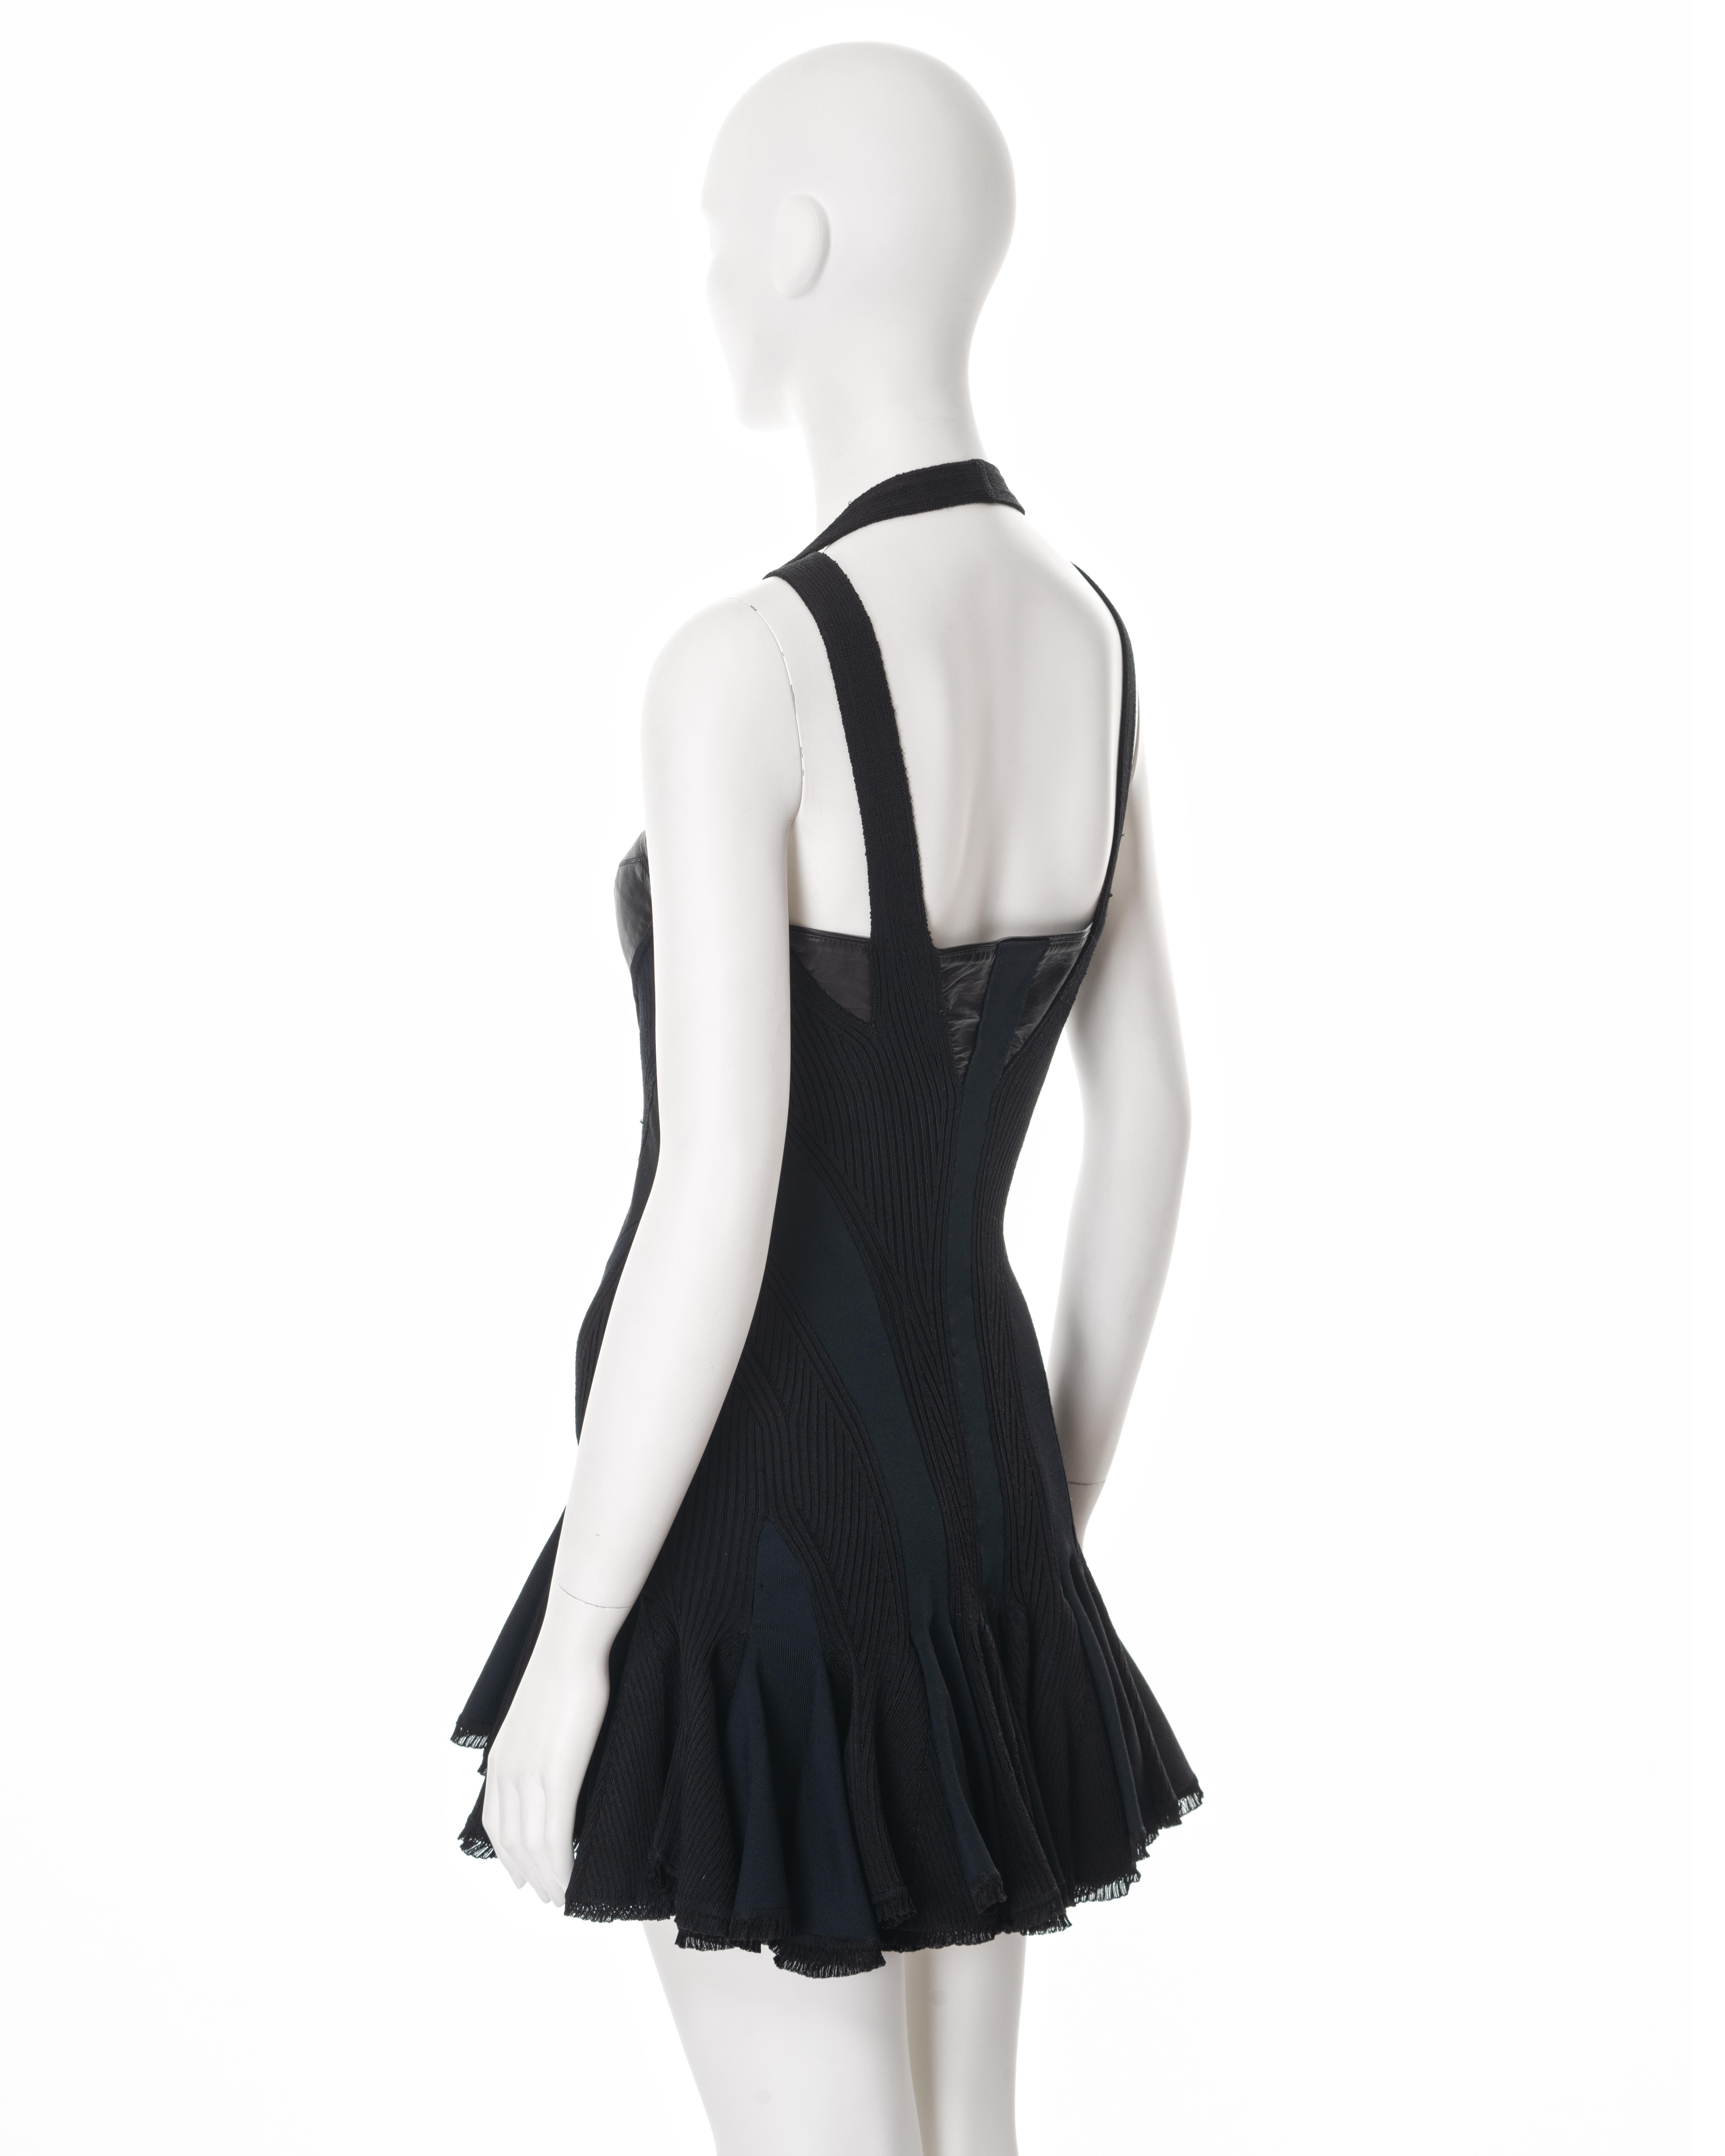 Alexander McQueen black rib knit mini dress with leather bustier, ss 2004 For Sale 5